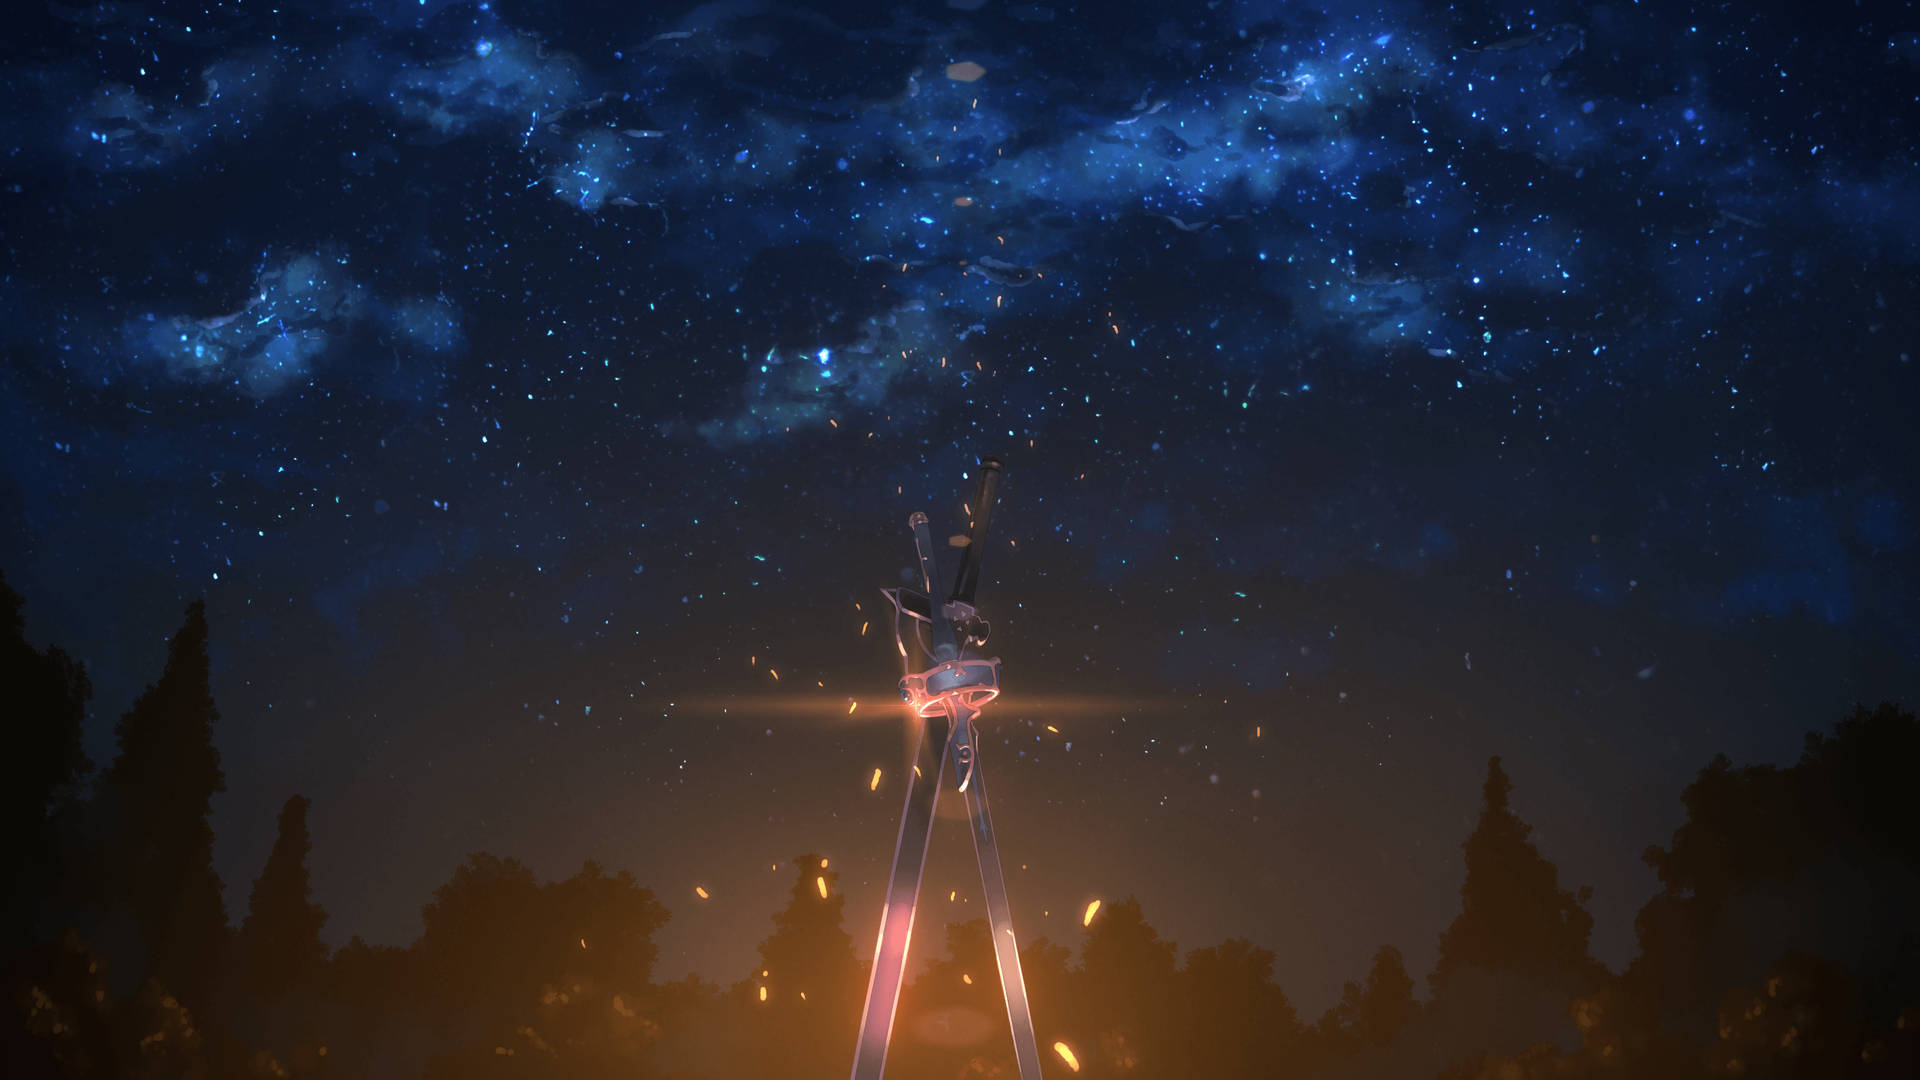 Sao Two Swords Starry Night Background